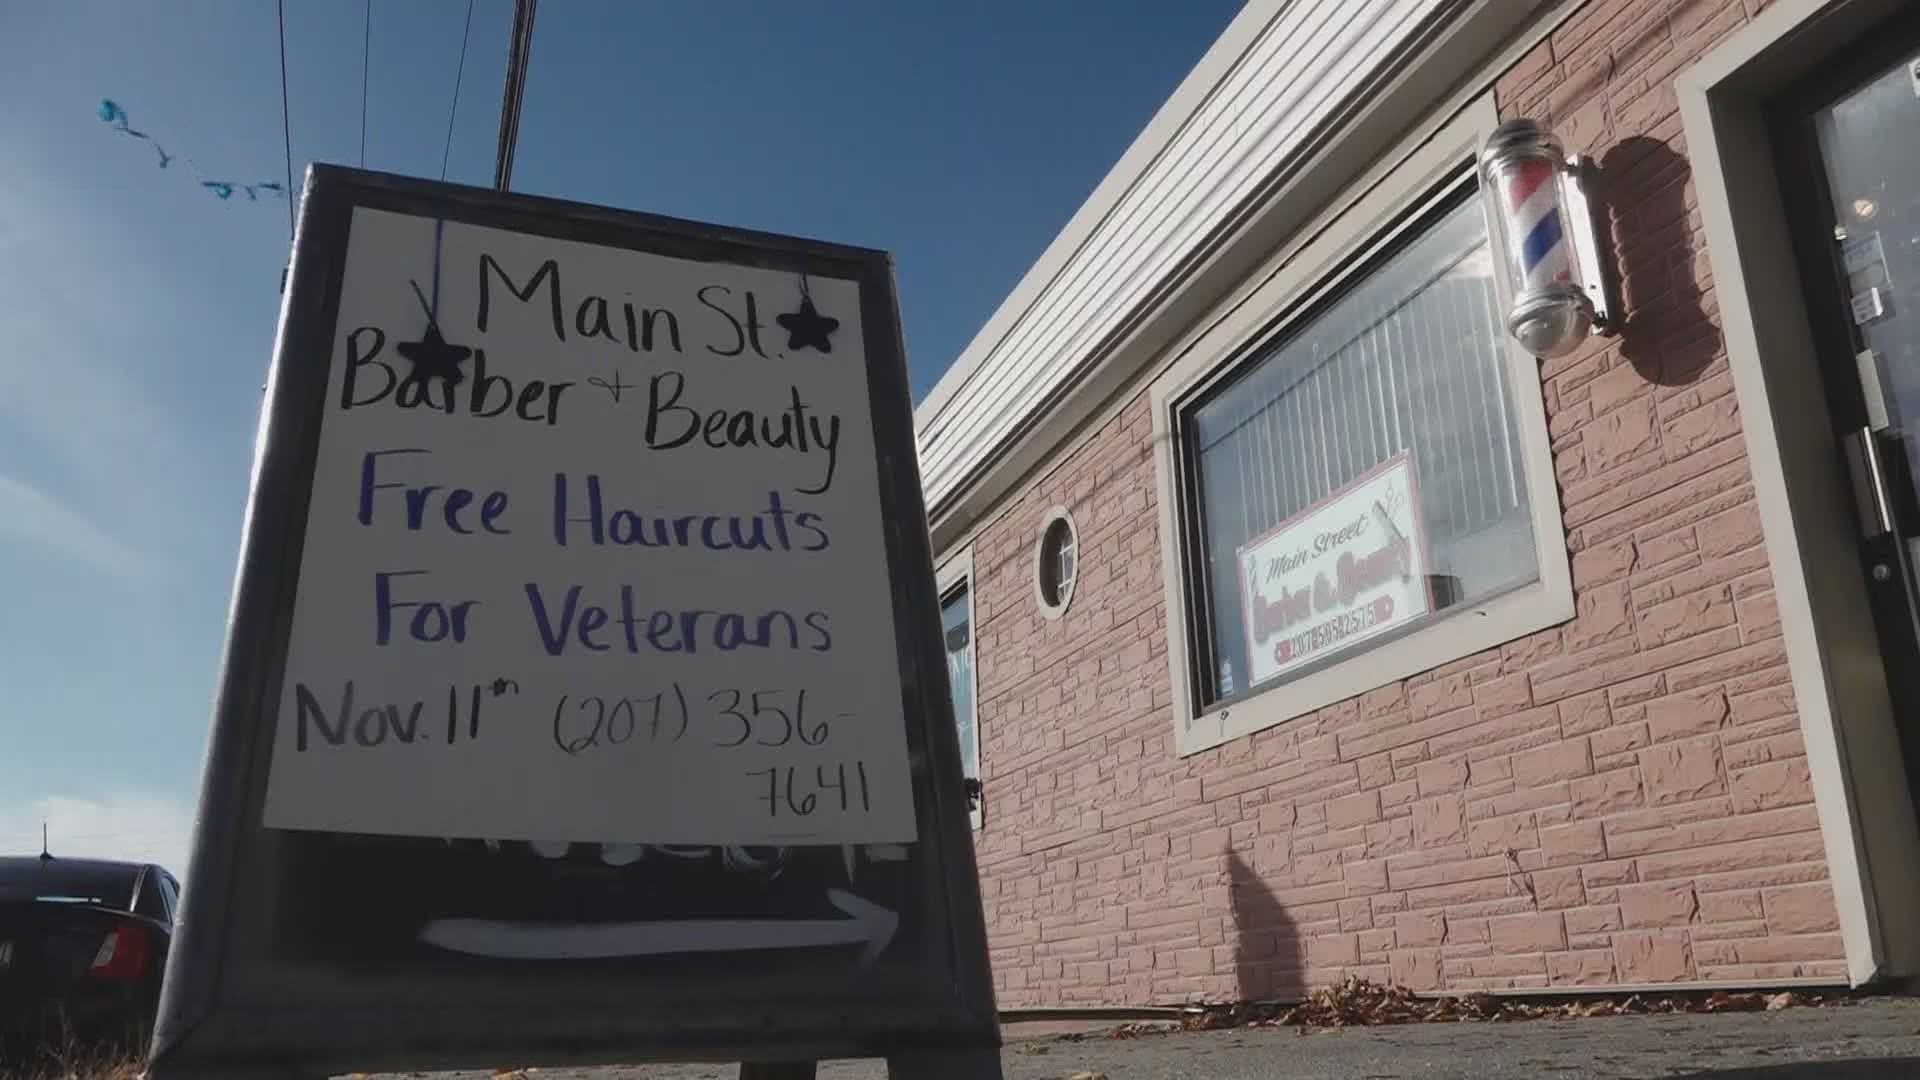 Every year, Main Street Barber and Beauty in Brewer gives back to those who served our country by cutting Veterans' hair for free.